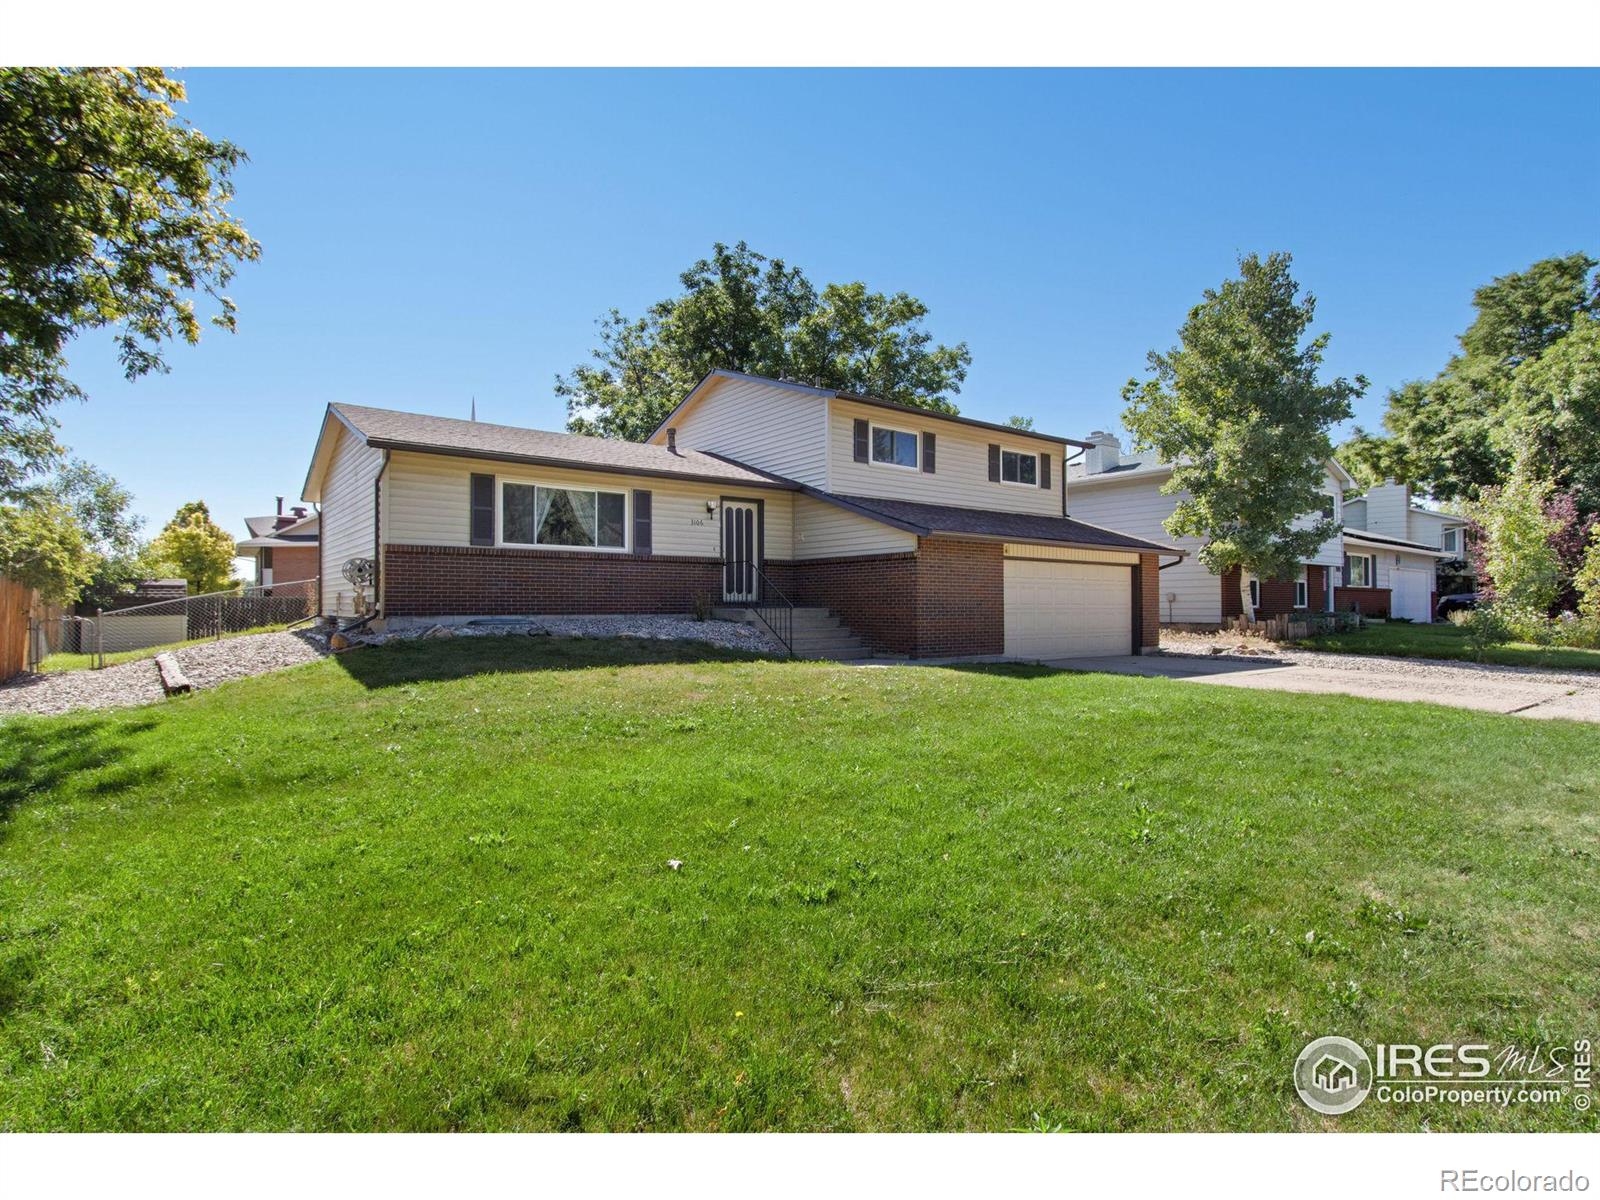 3106  Eagle Drive, fort collins MLS: 4567891014067 Beds: 5 Baths: 3 Price: $485,000